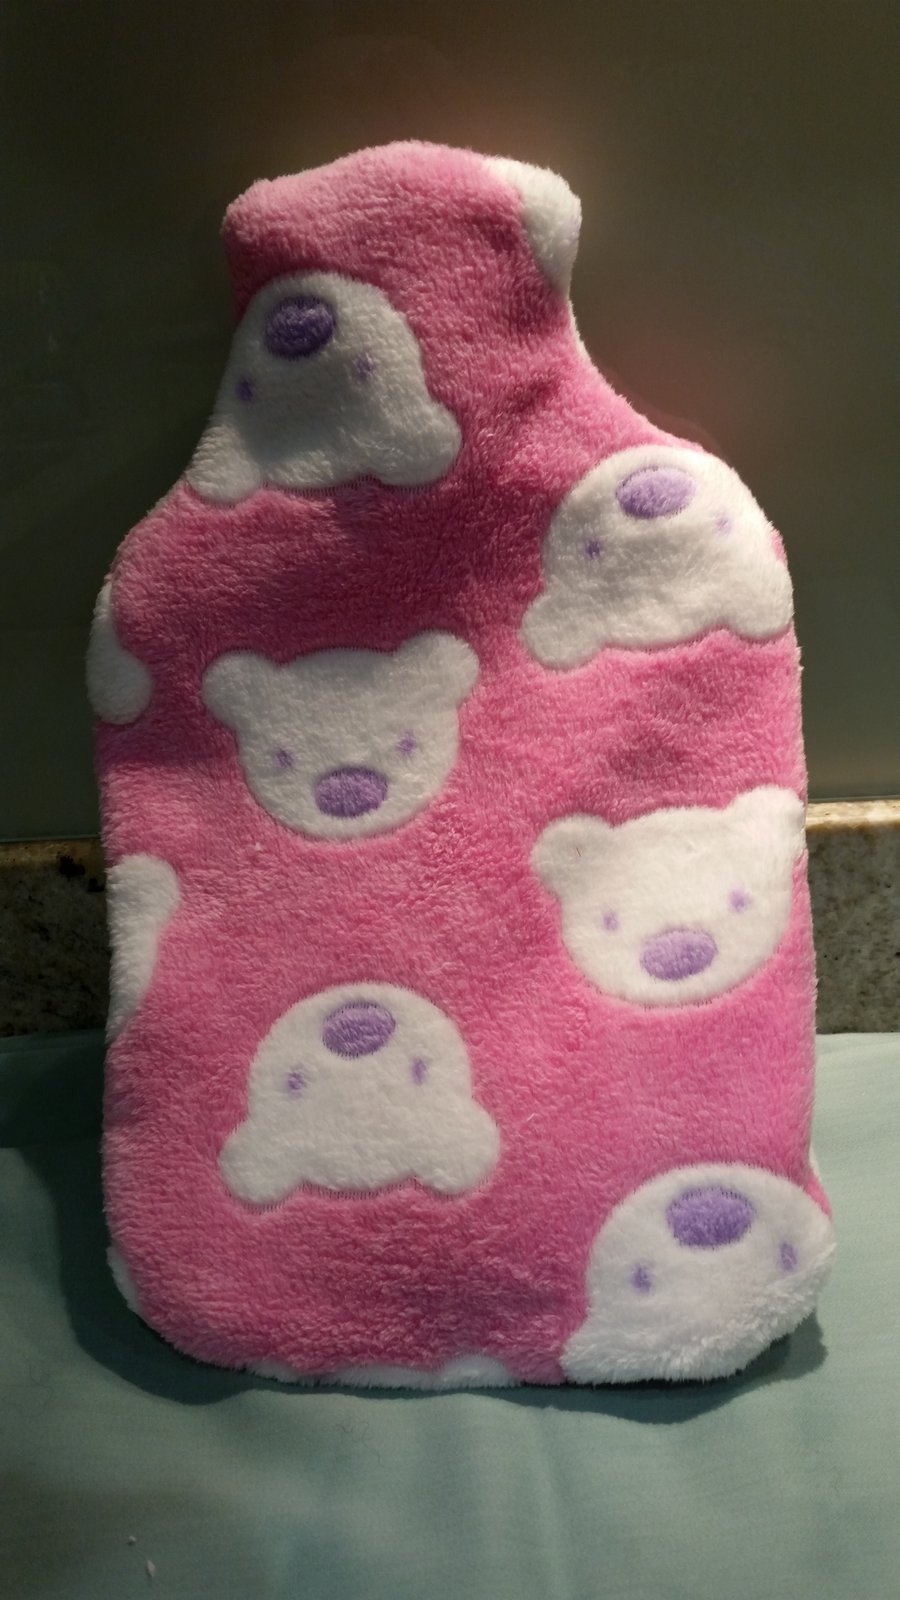 Soft fluffy with teddy faces hotwater bottle cover, including hot water bottle